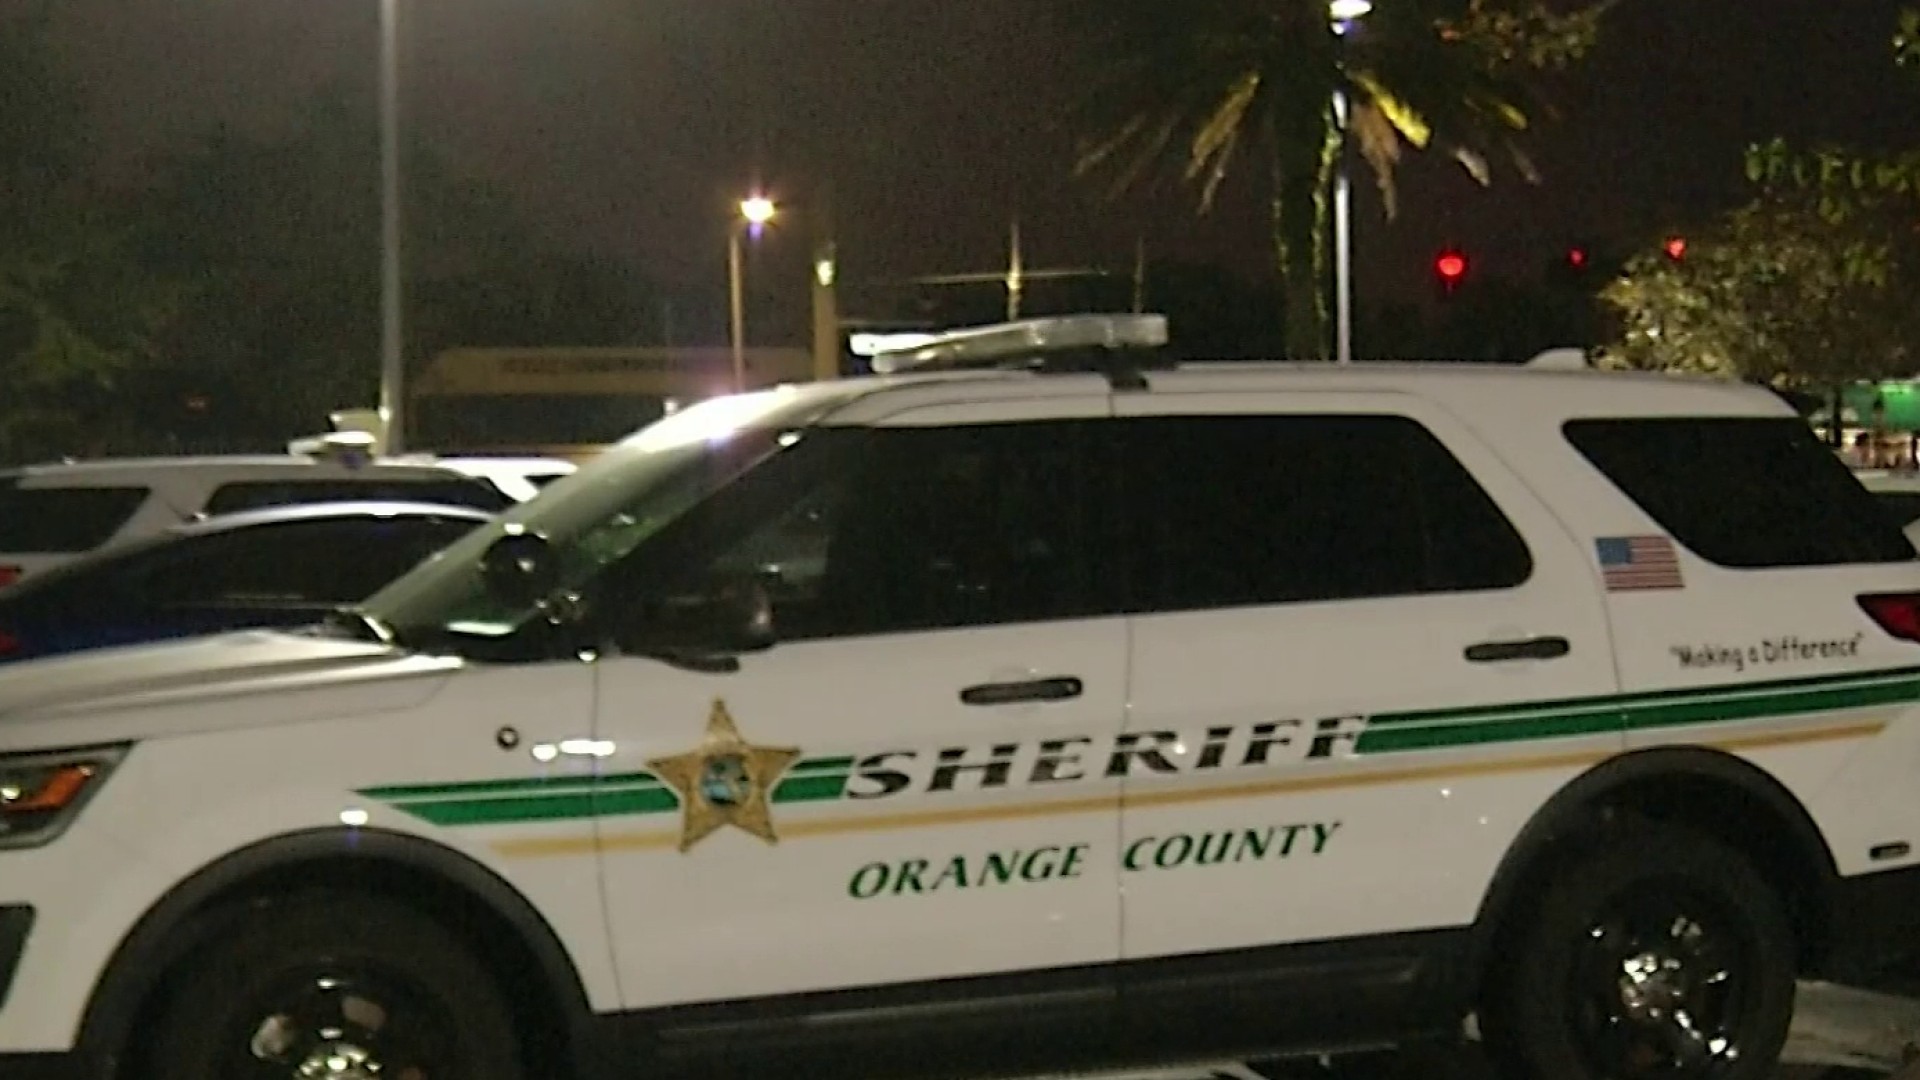 Woman sues Orange County Sheriff's Office claiming excessive use of force